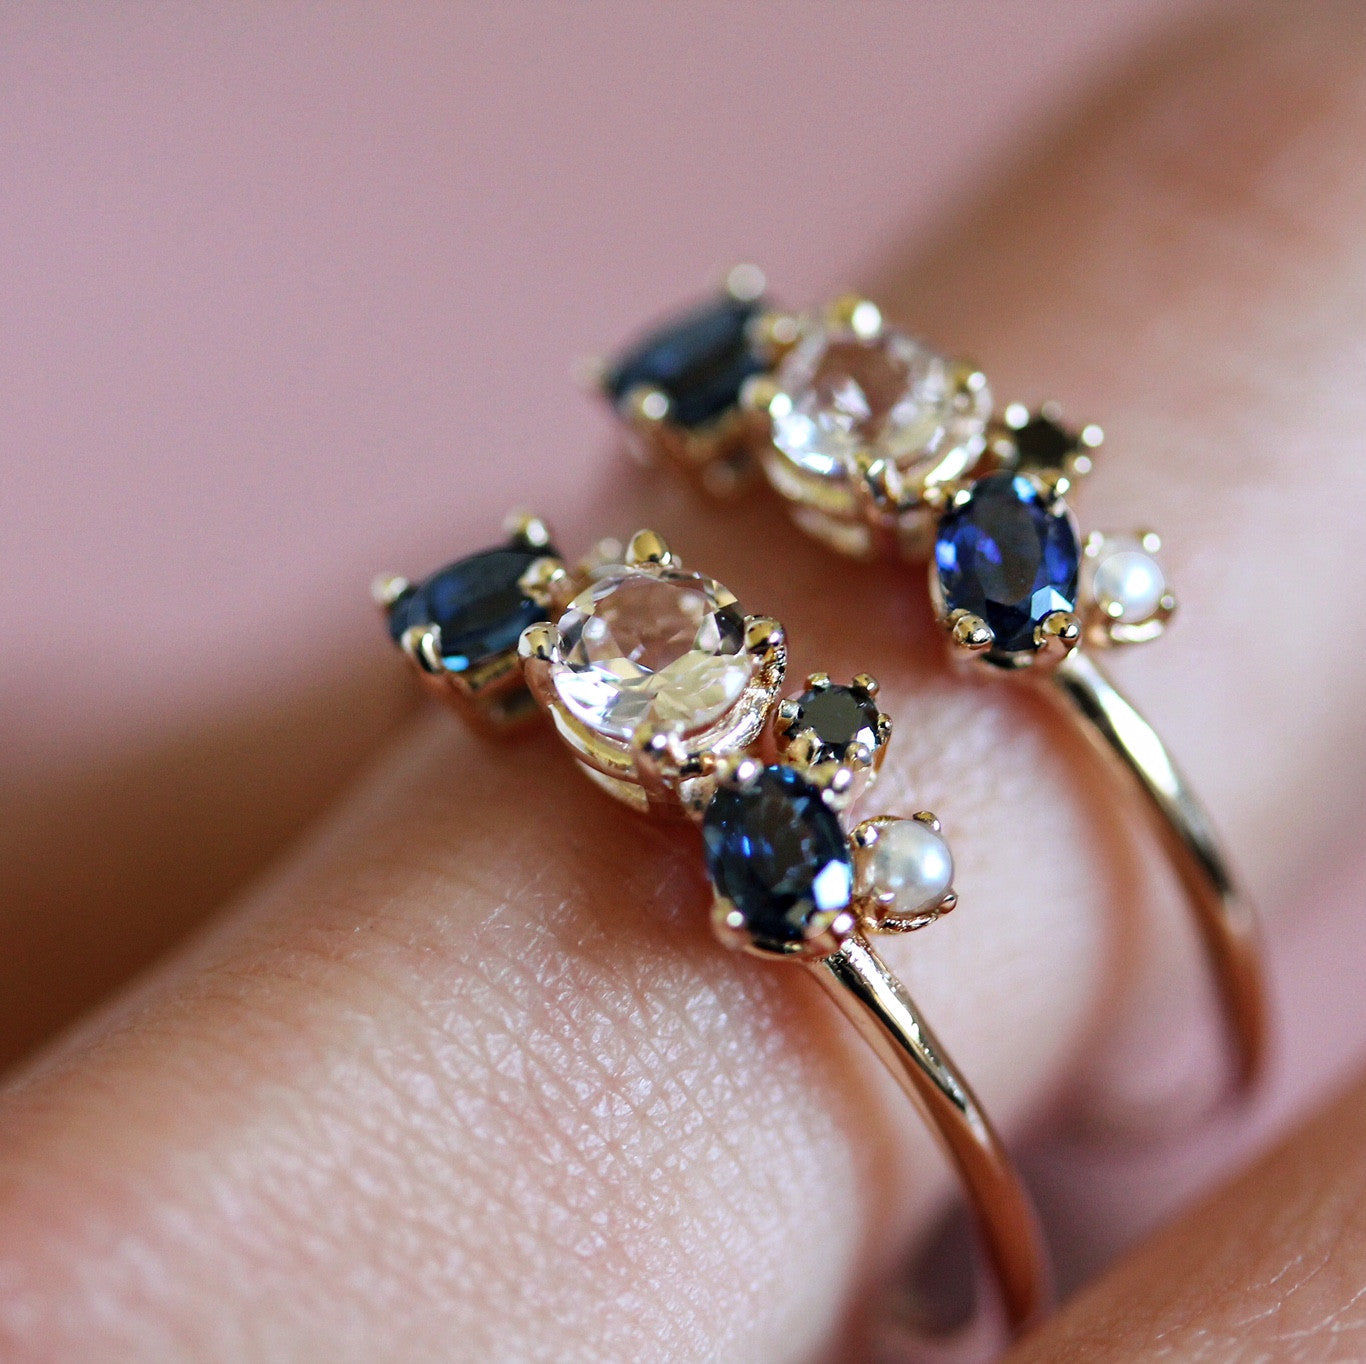 MORGANITE WITH BLUE SAPPHIRE WINGS RING